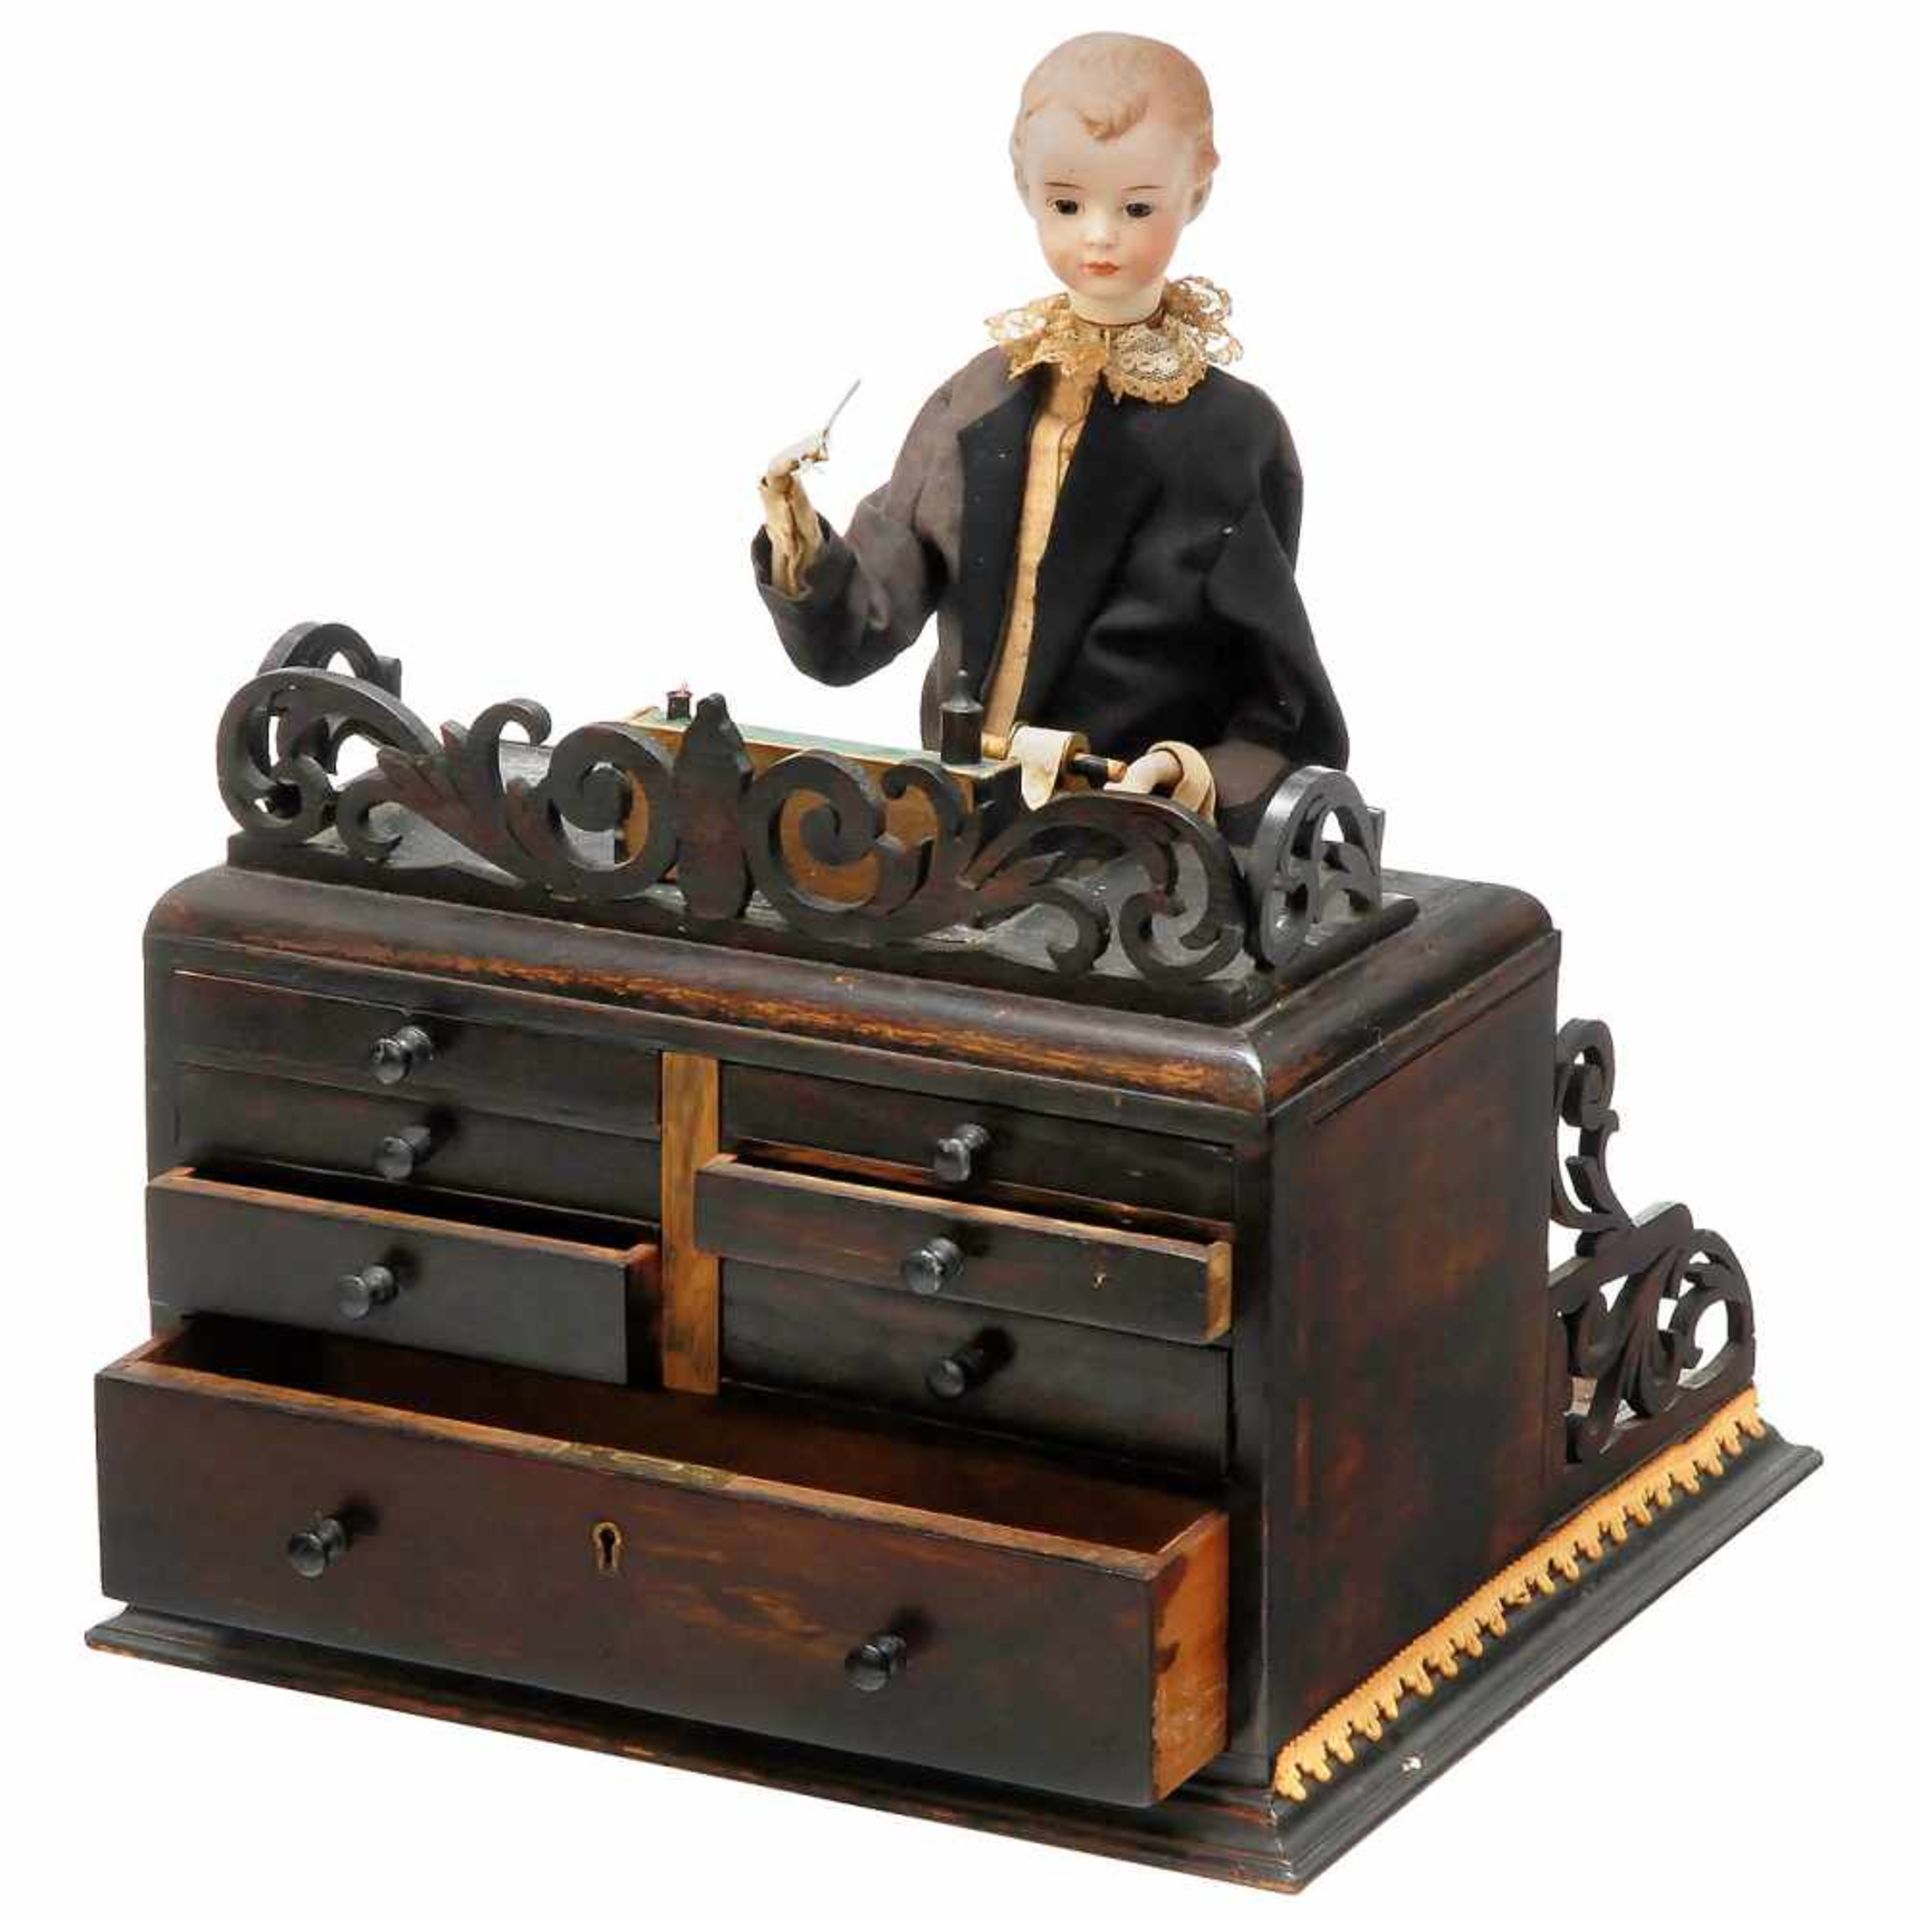 Mechanical Accountant Automaton with MusicDate and manufacturer unknown, Heubach bisque head with